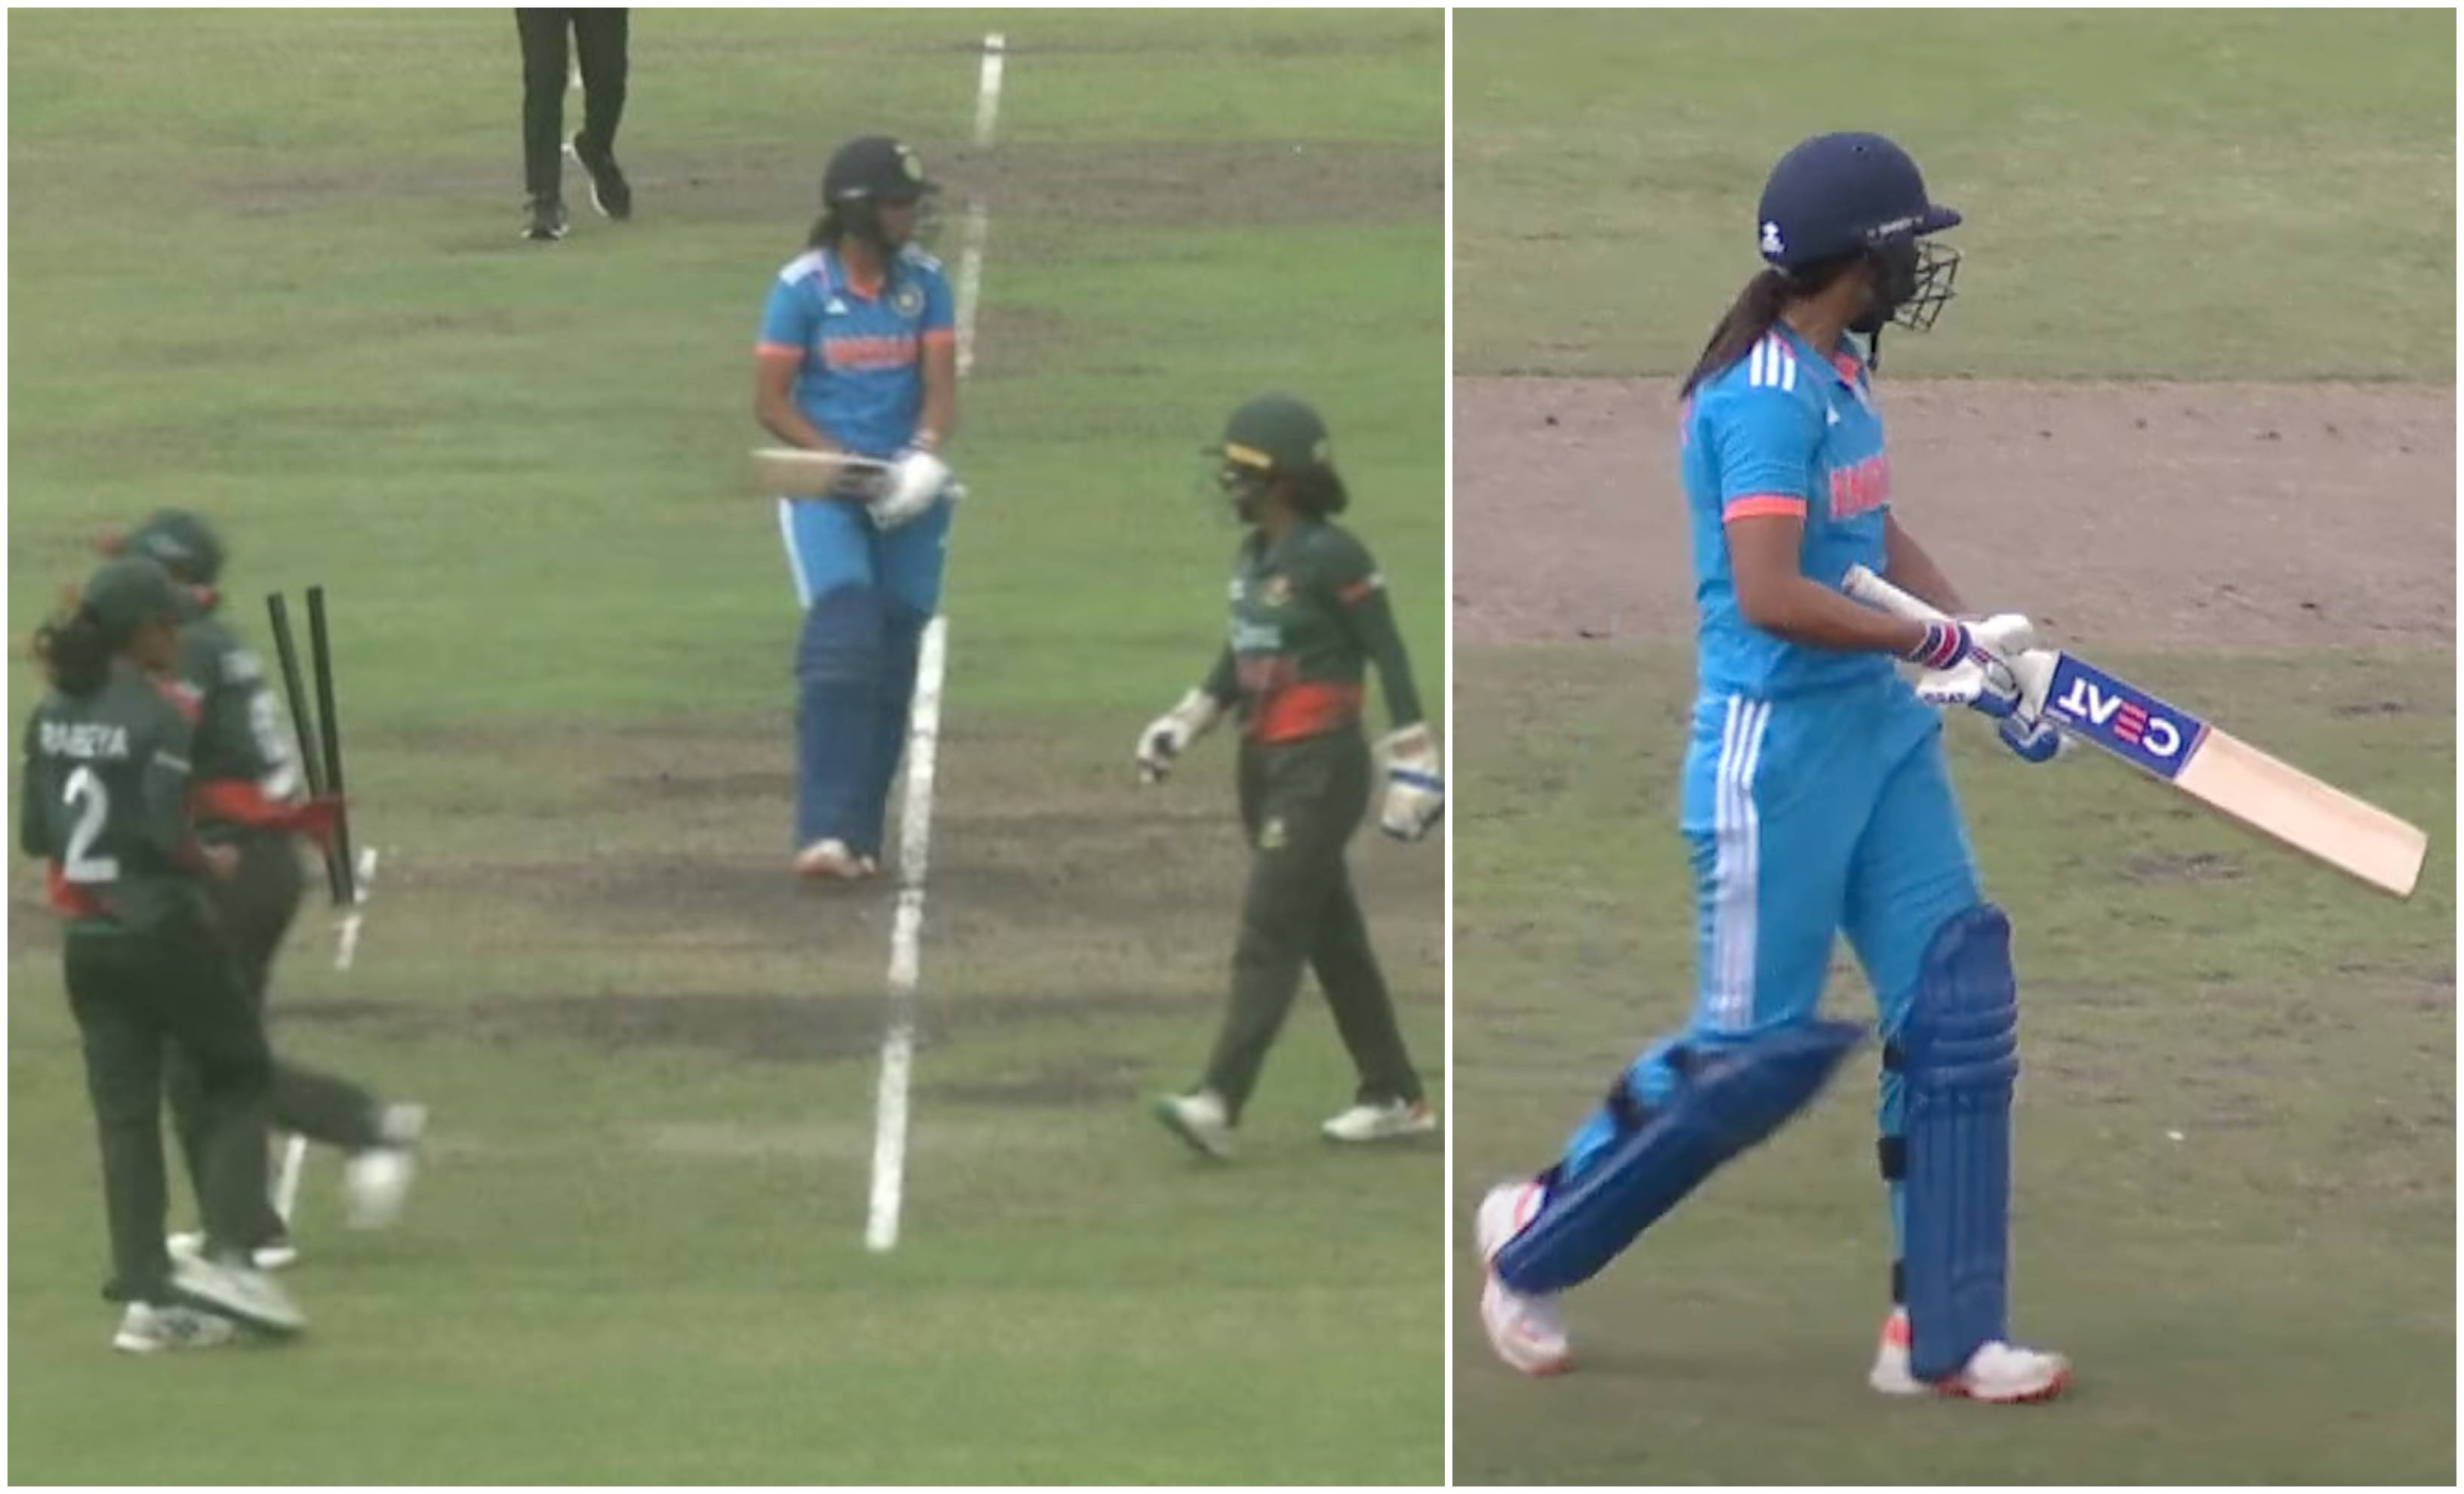 Harmanpreet Kaur lost her cool after being given out LBW | Screengrab